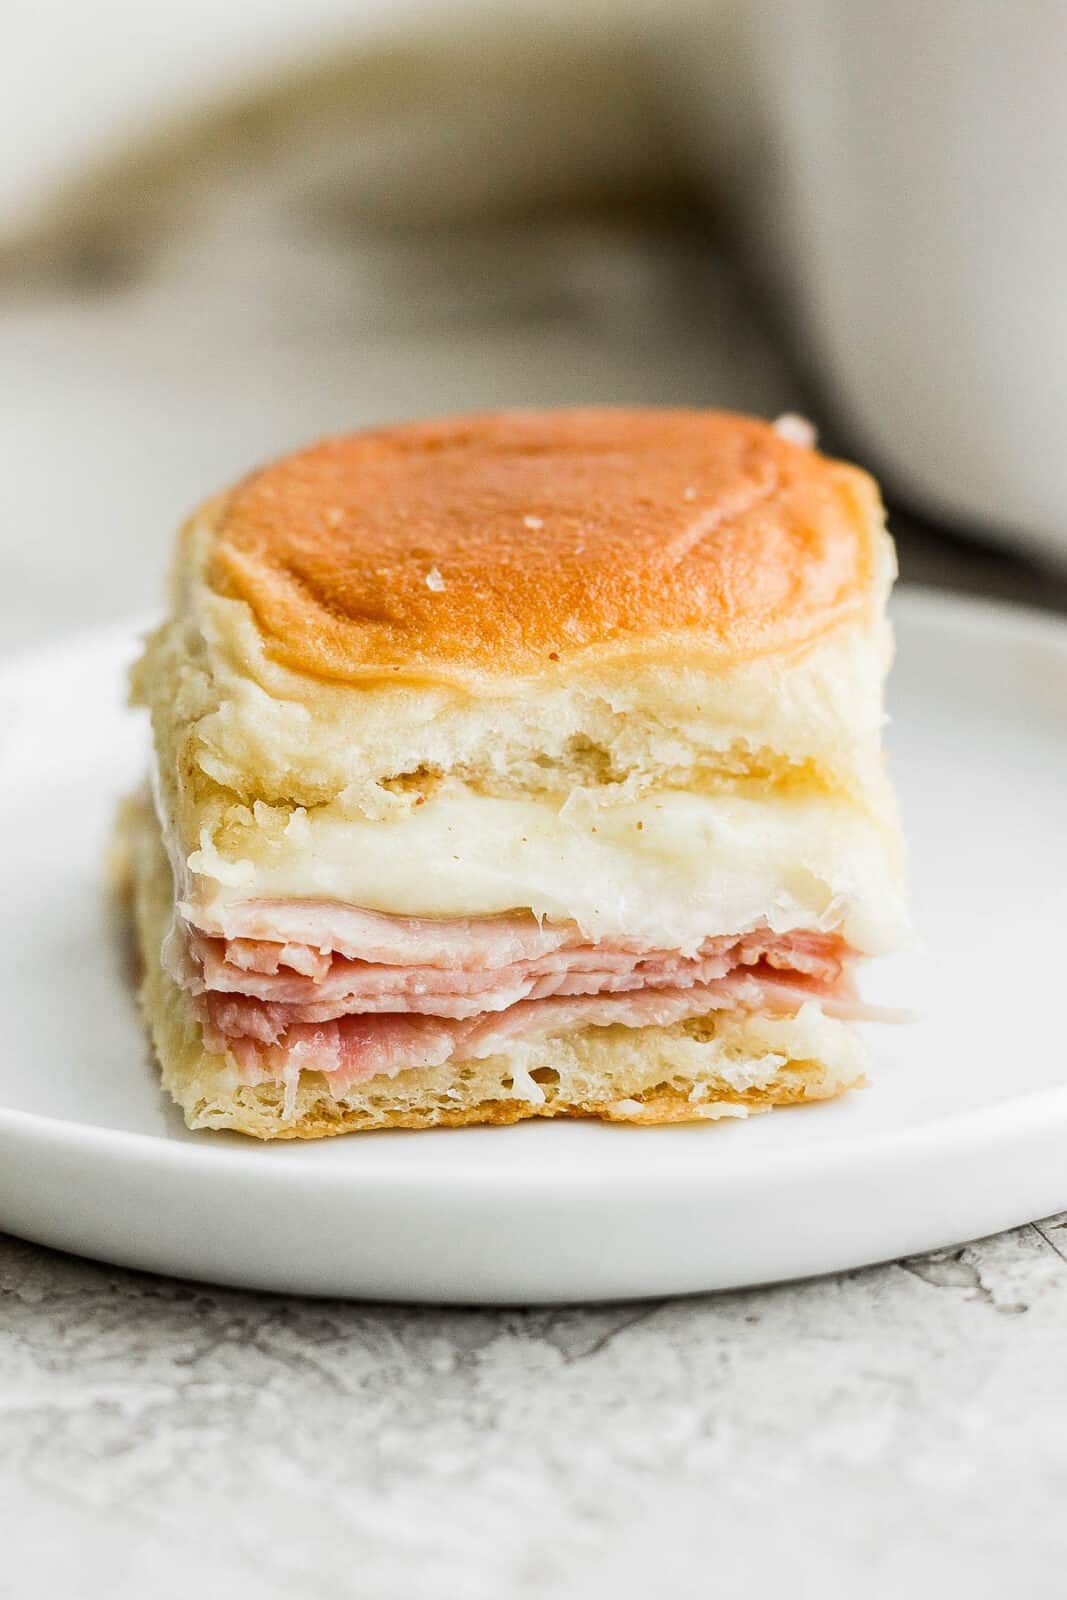 A ham and cheese slider on a plate.